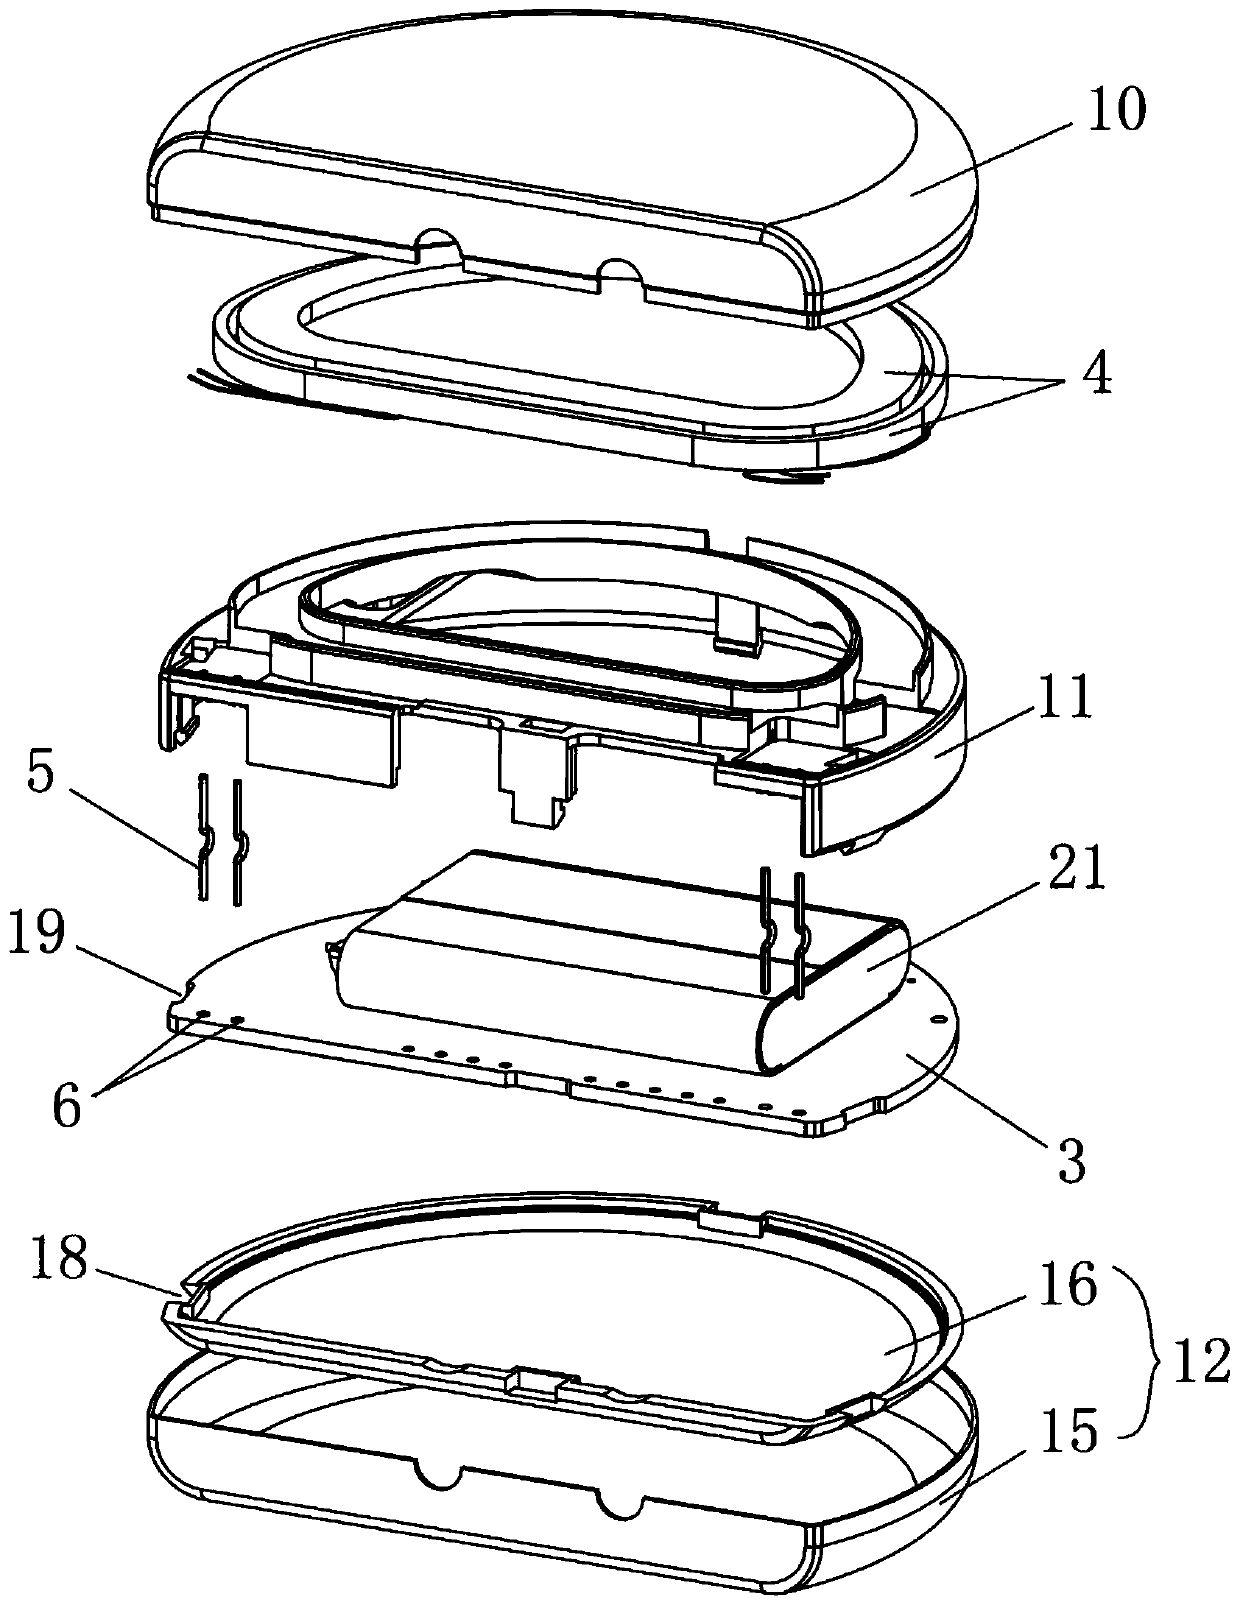 Wireless charging and communication coil fixed connection assembly of active implantable medical device